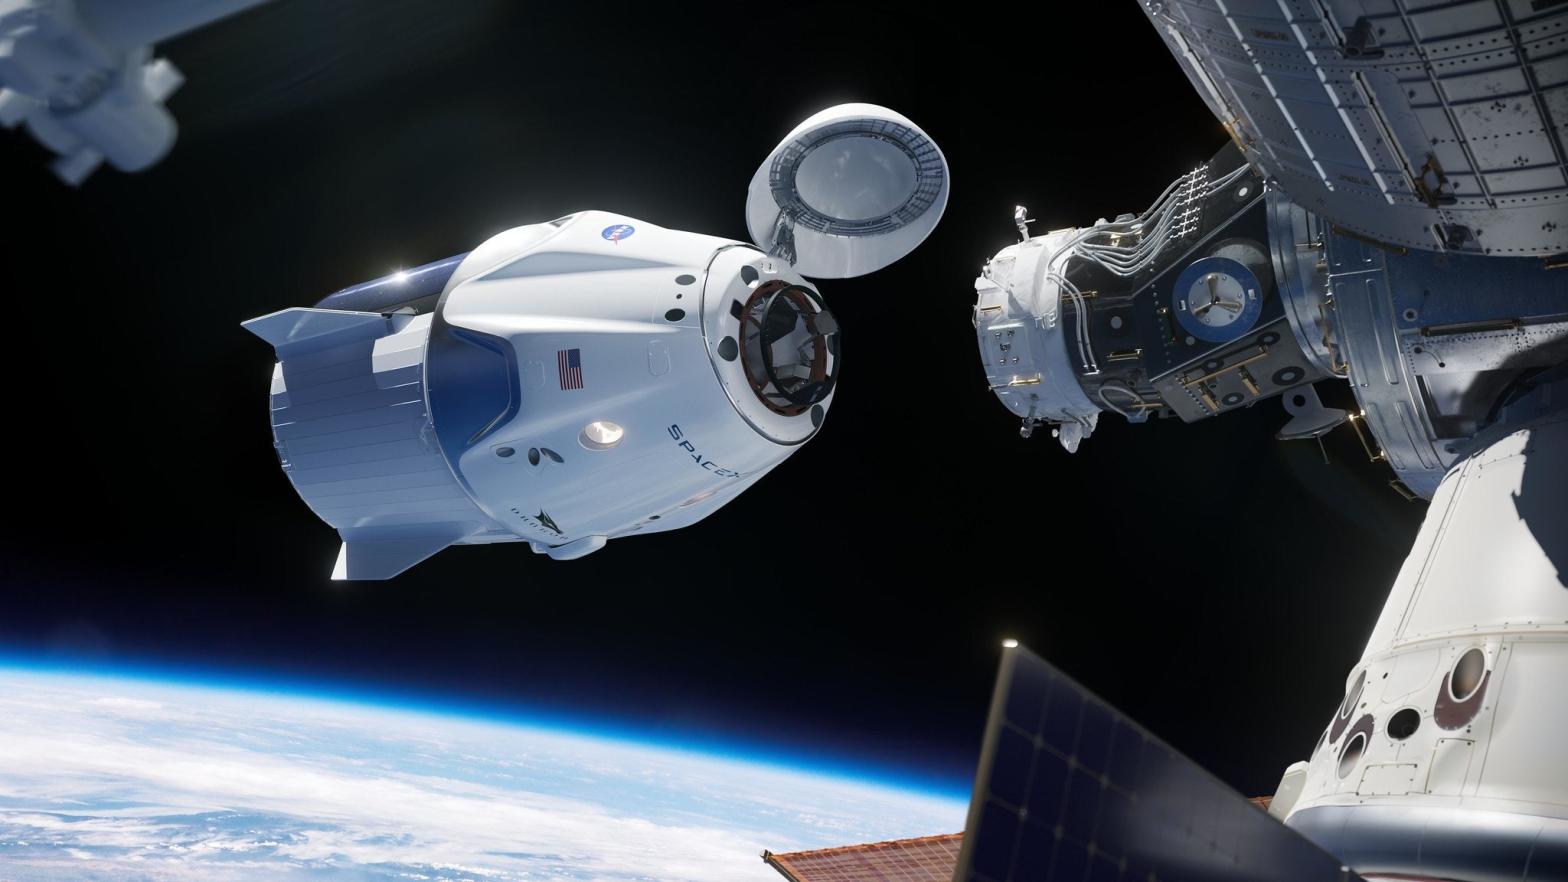 Artistic impression of Crew Dragon approaching the Harmony module at the ISS. (Image: NASA)